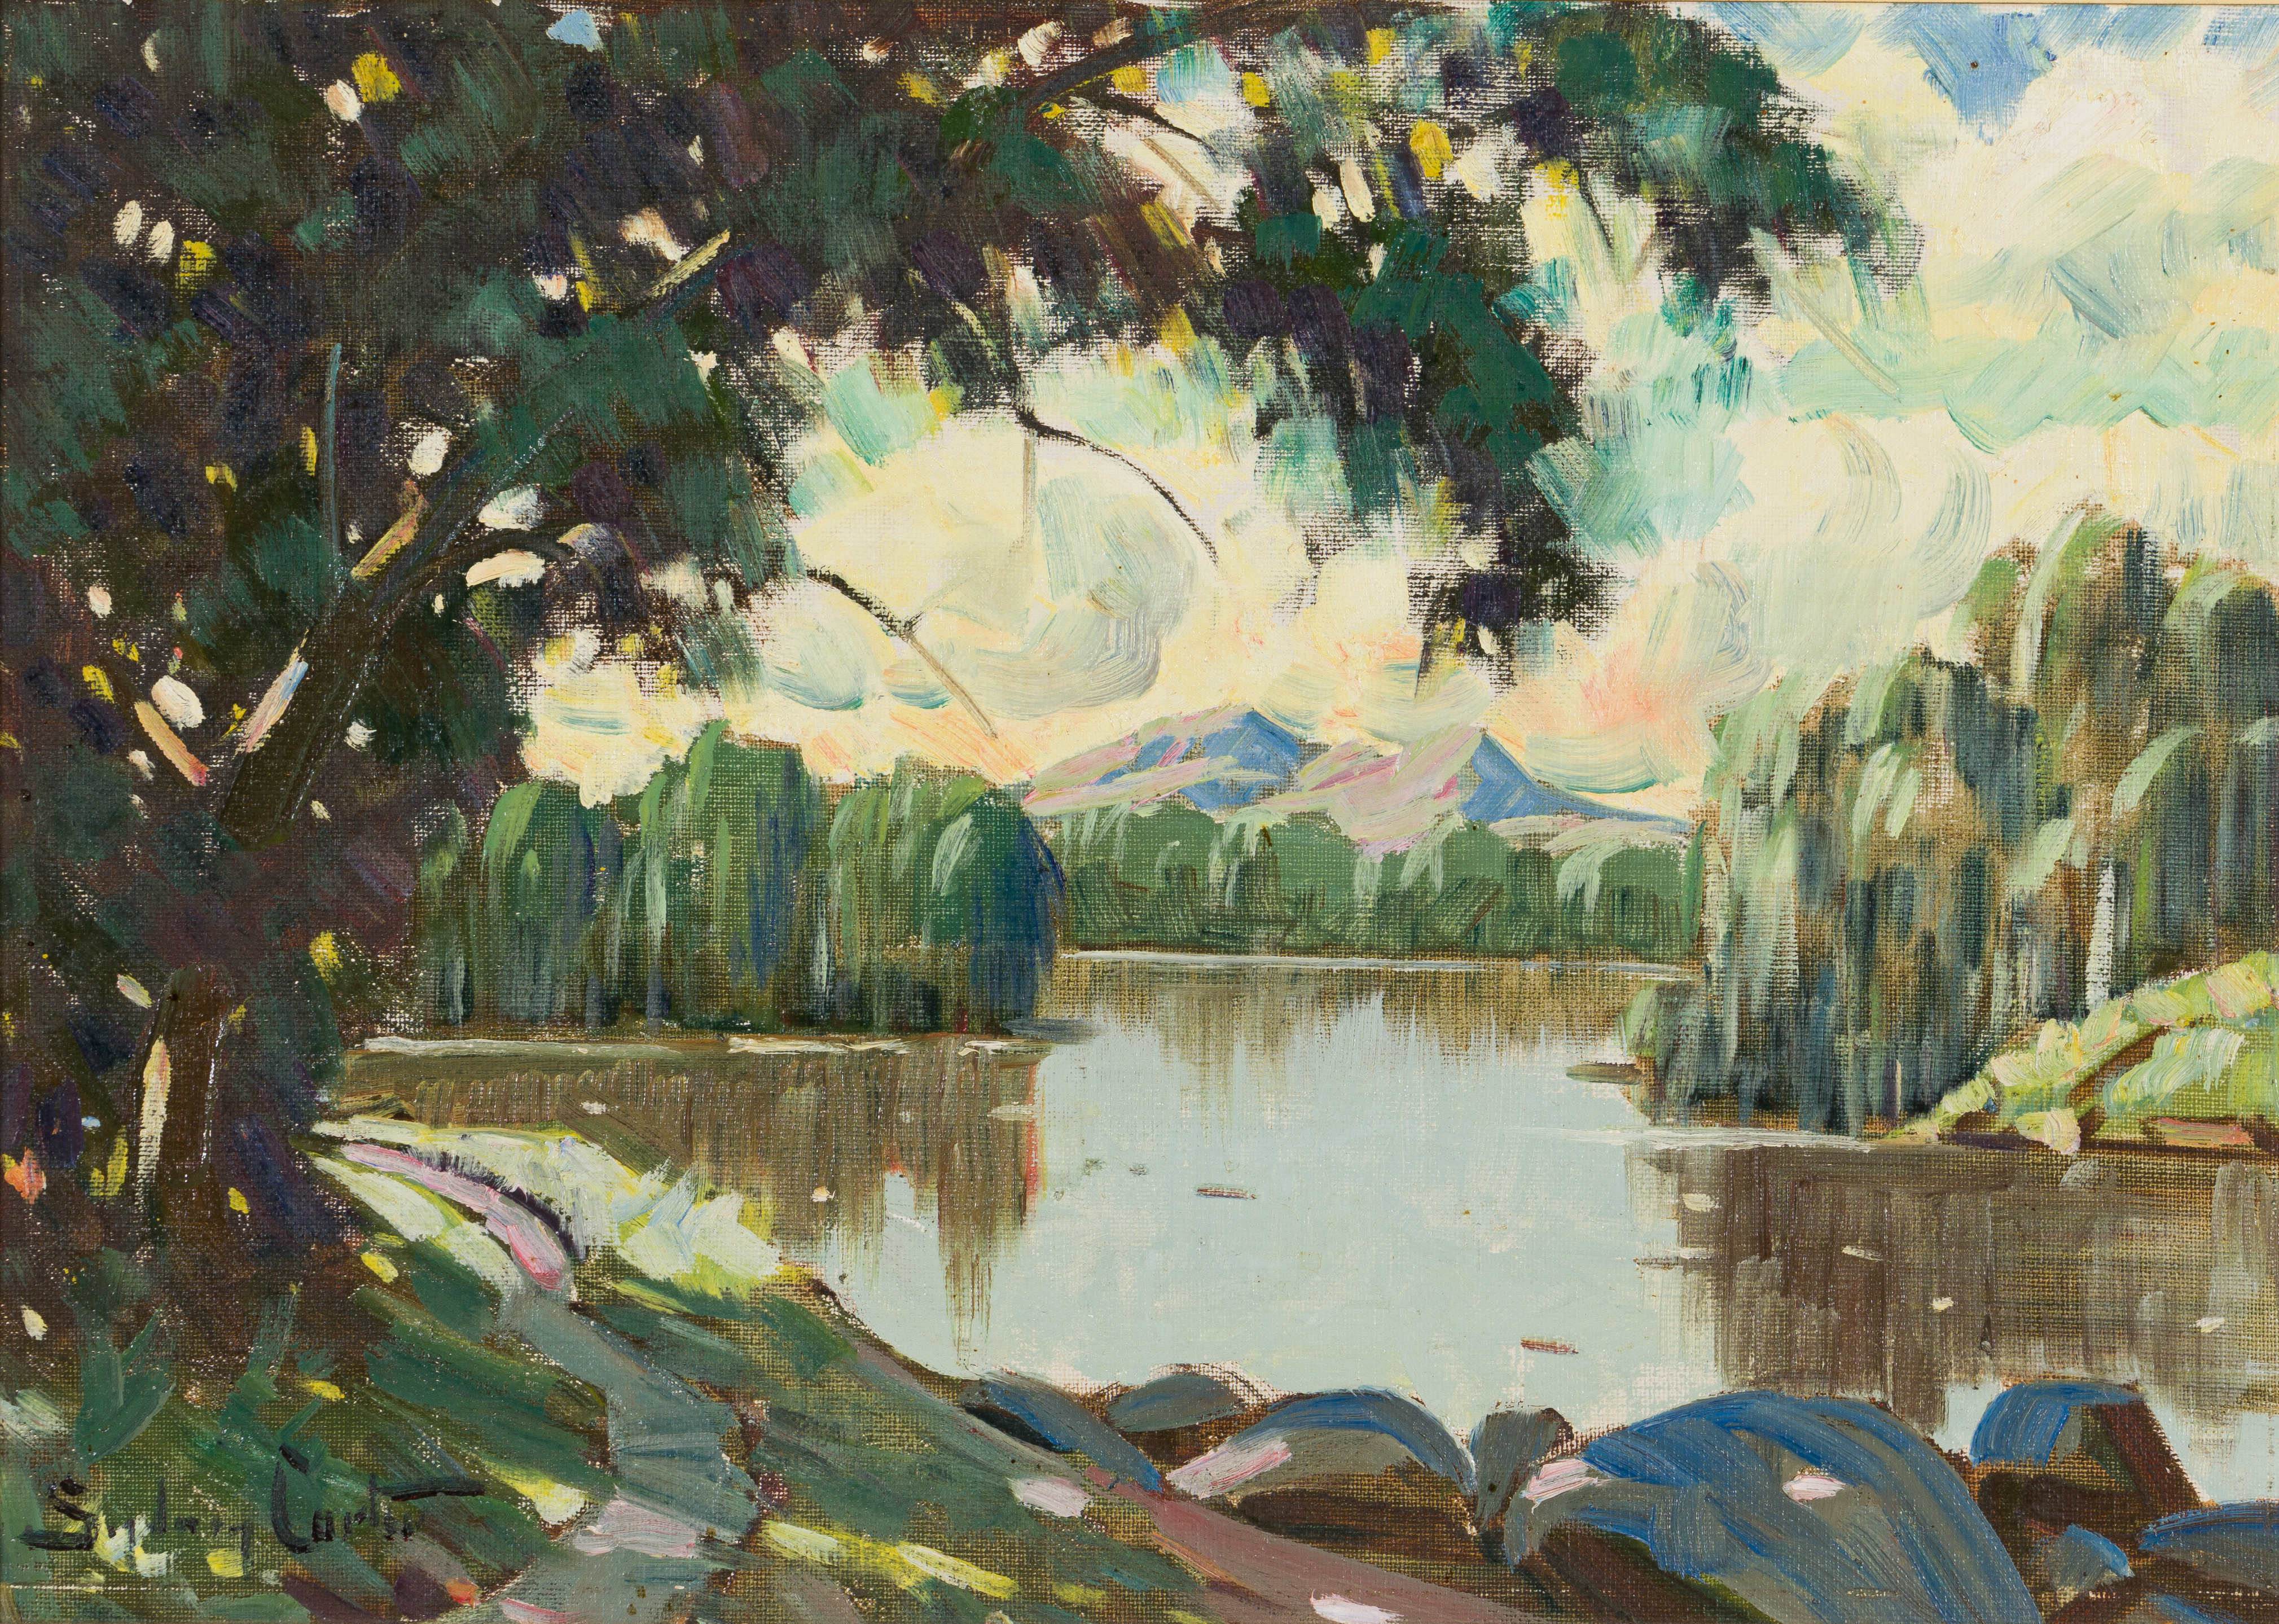 Sydney Carter; Landscape with River and Willows